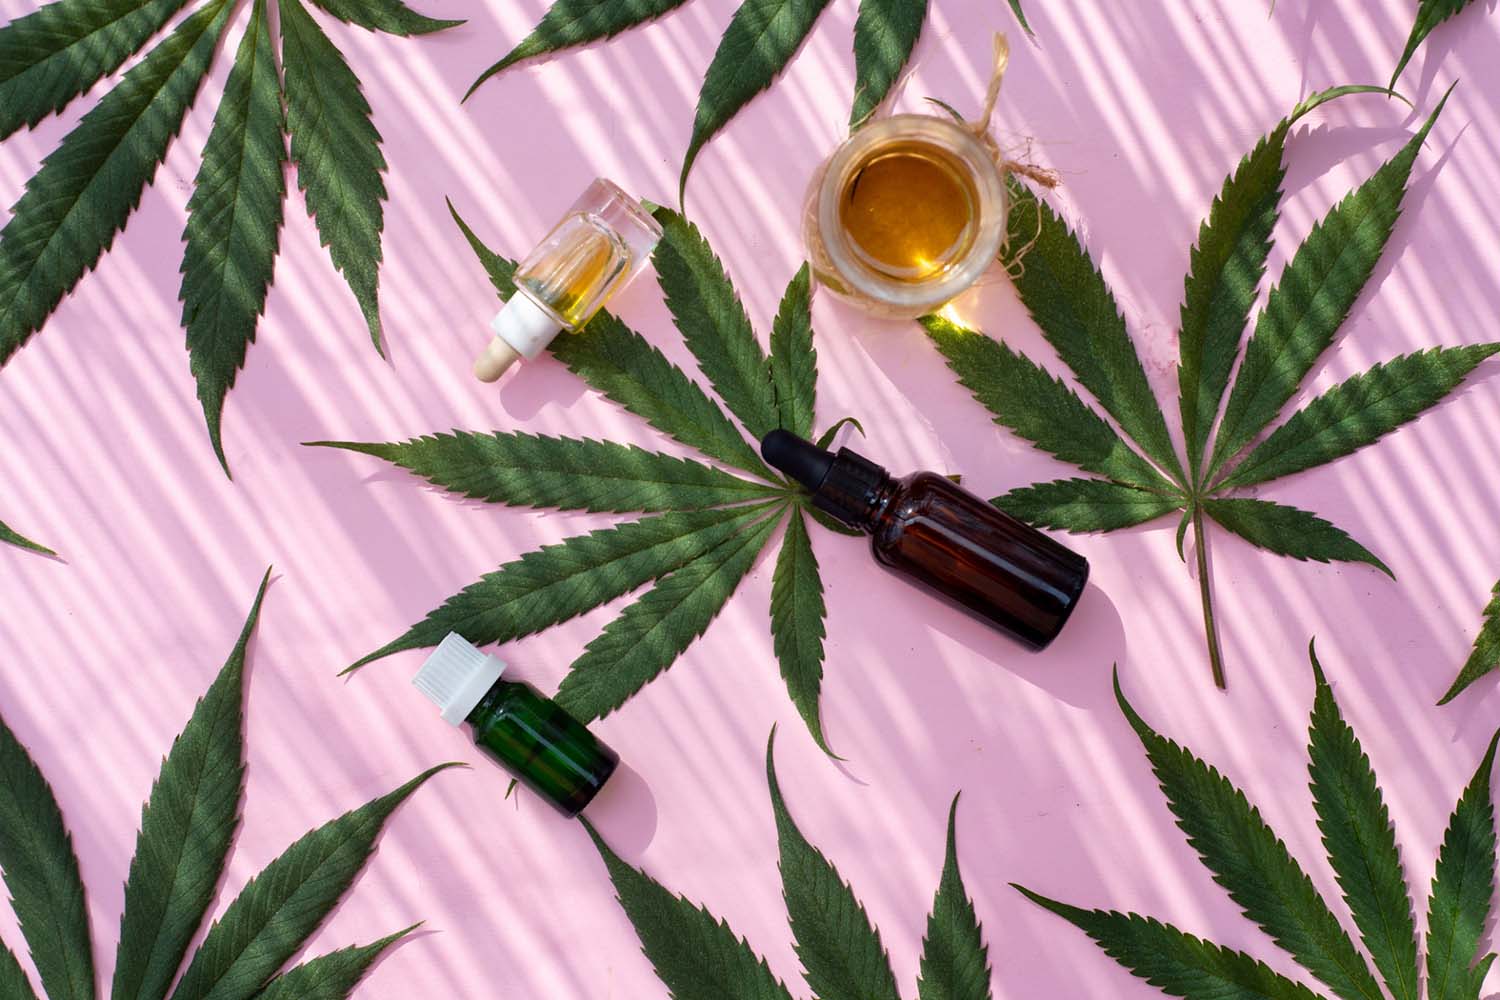 Are CBD Oil Benefits Too Good to be True?